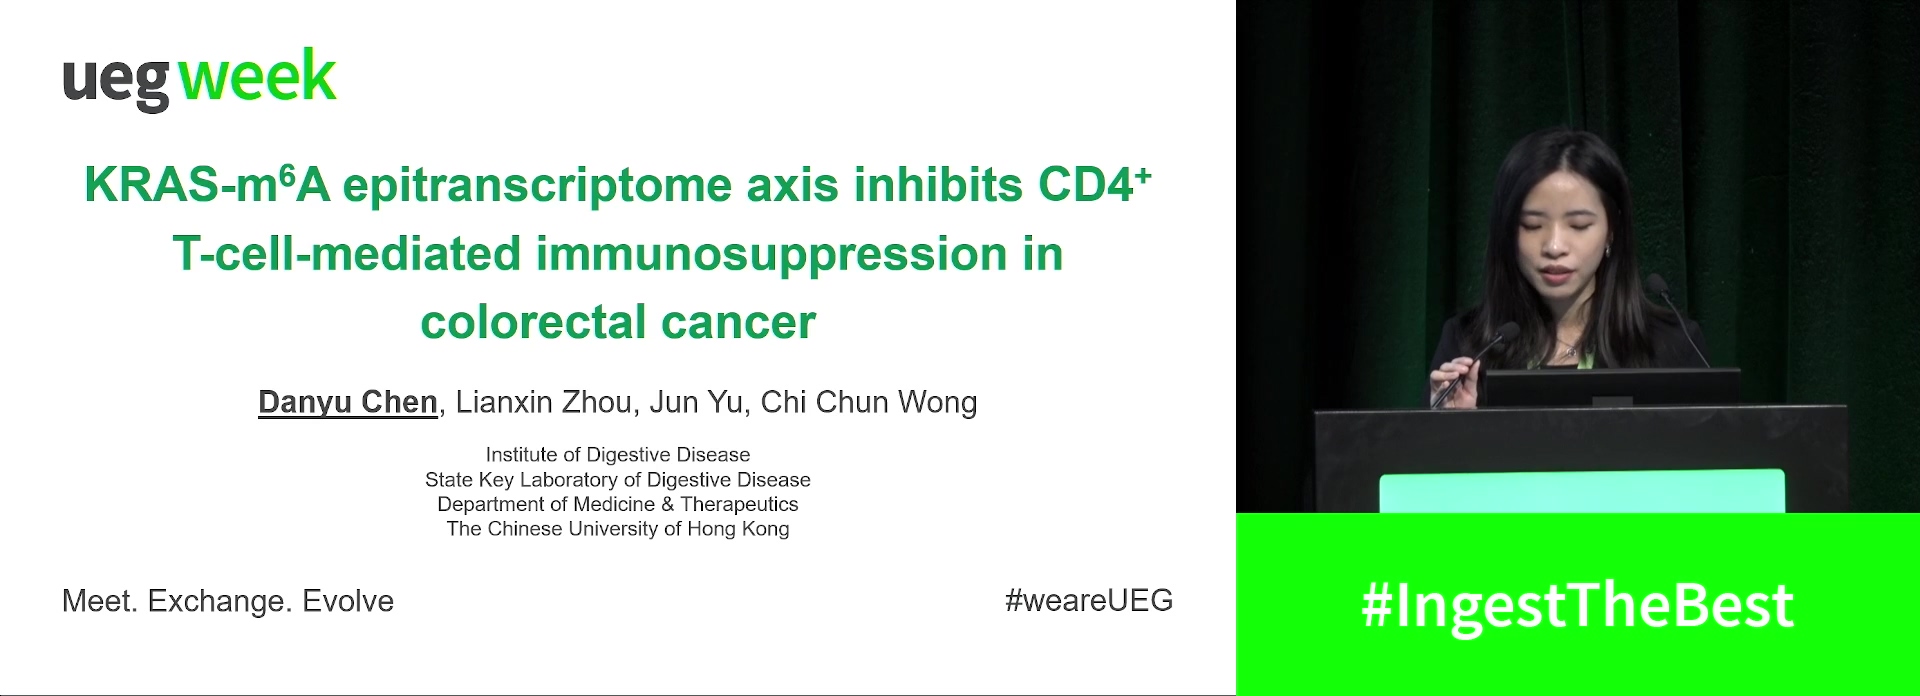 KRAS-M6A EPITRANSCRIPTOME AXIS PROMOTES CD4+ T-CELL-MEDIATED IMMUNOSUPPRESSION IN COLORECTAL CANCER